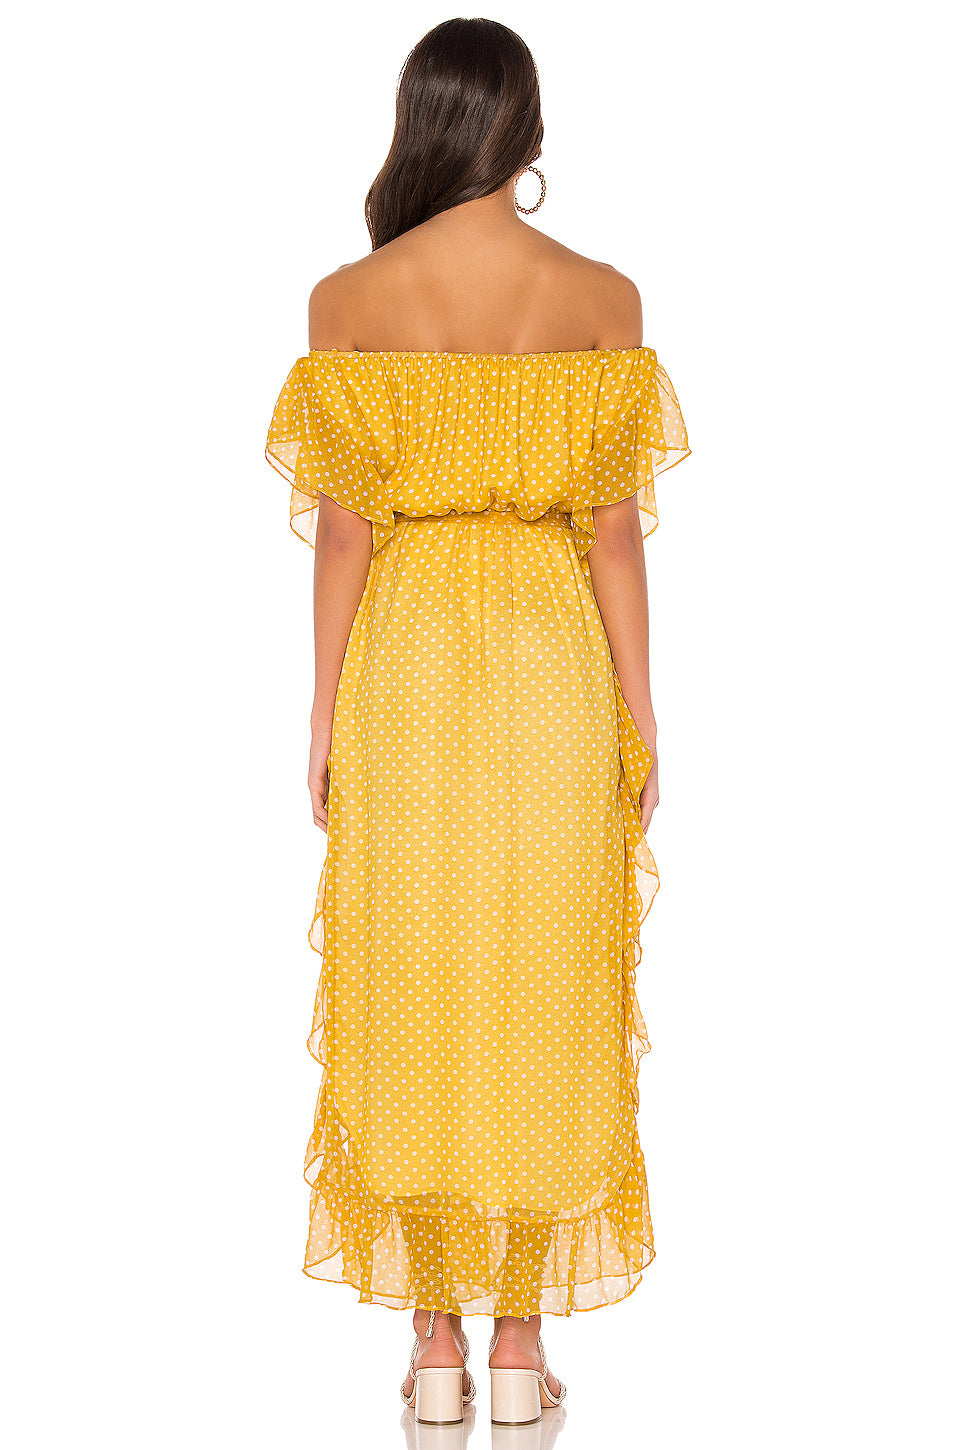 Blaire Dress in YELLOW